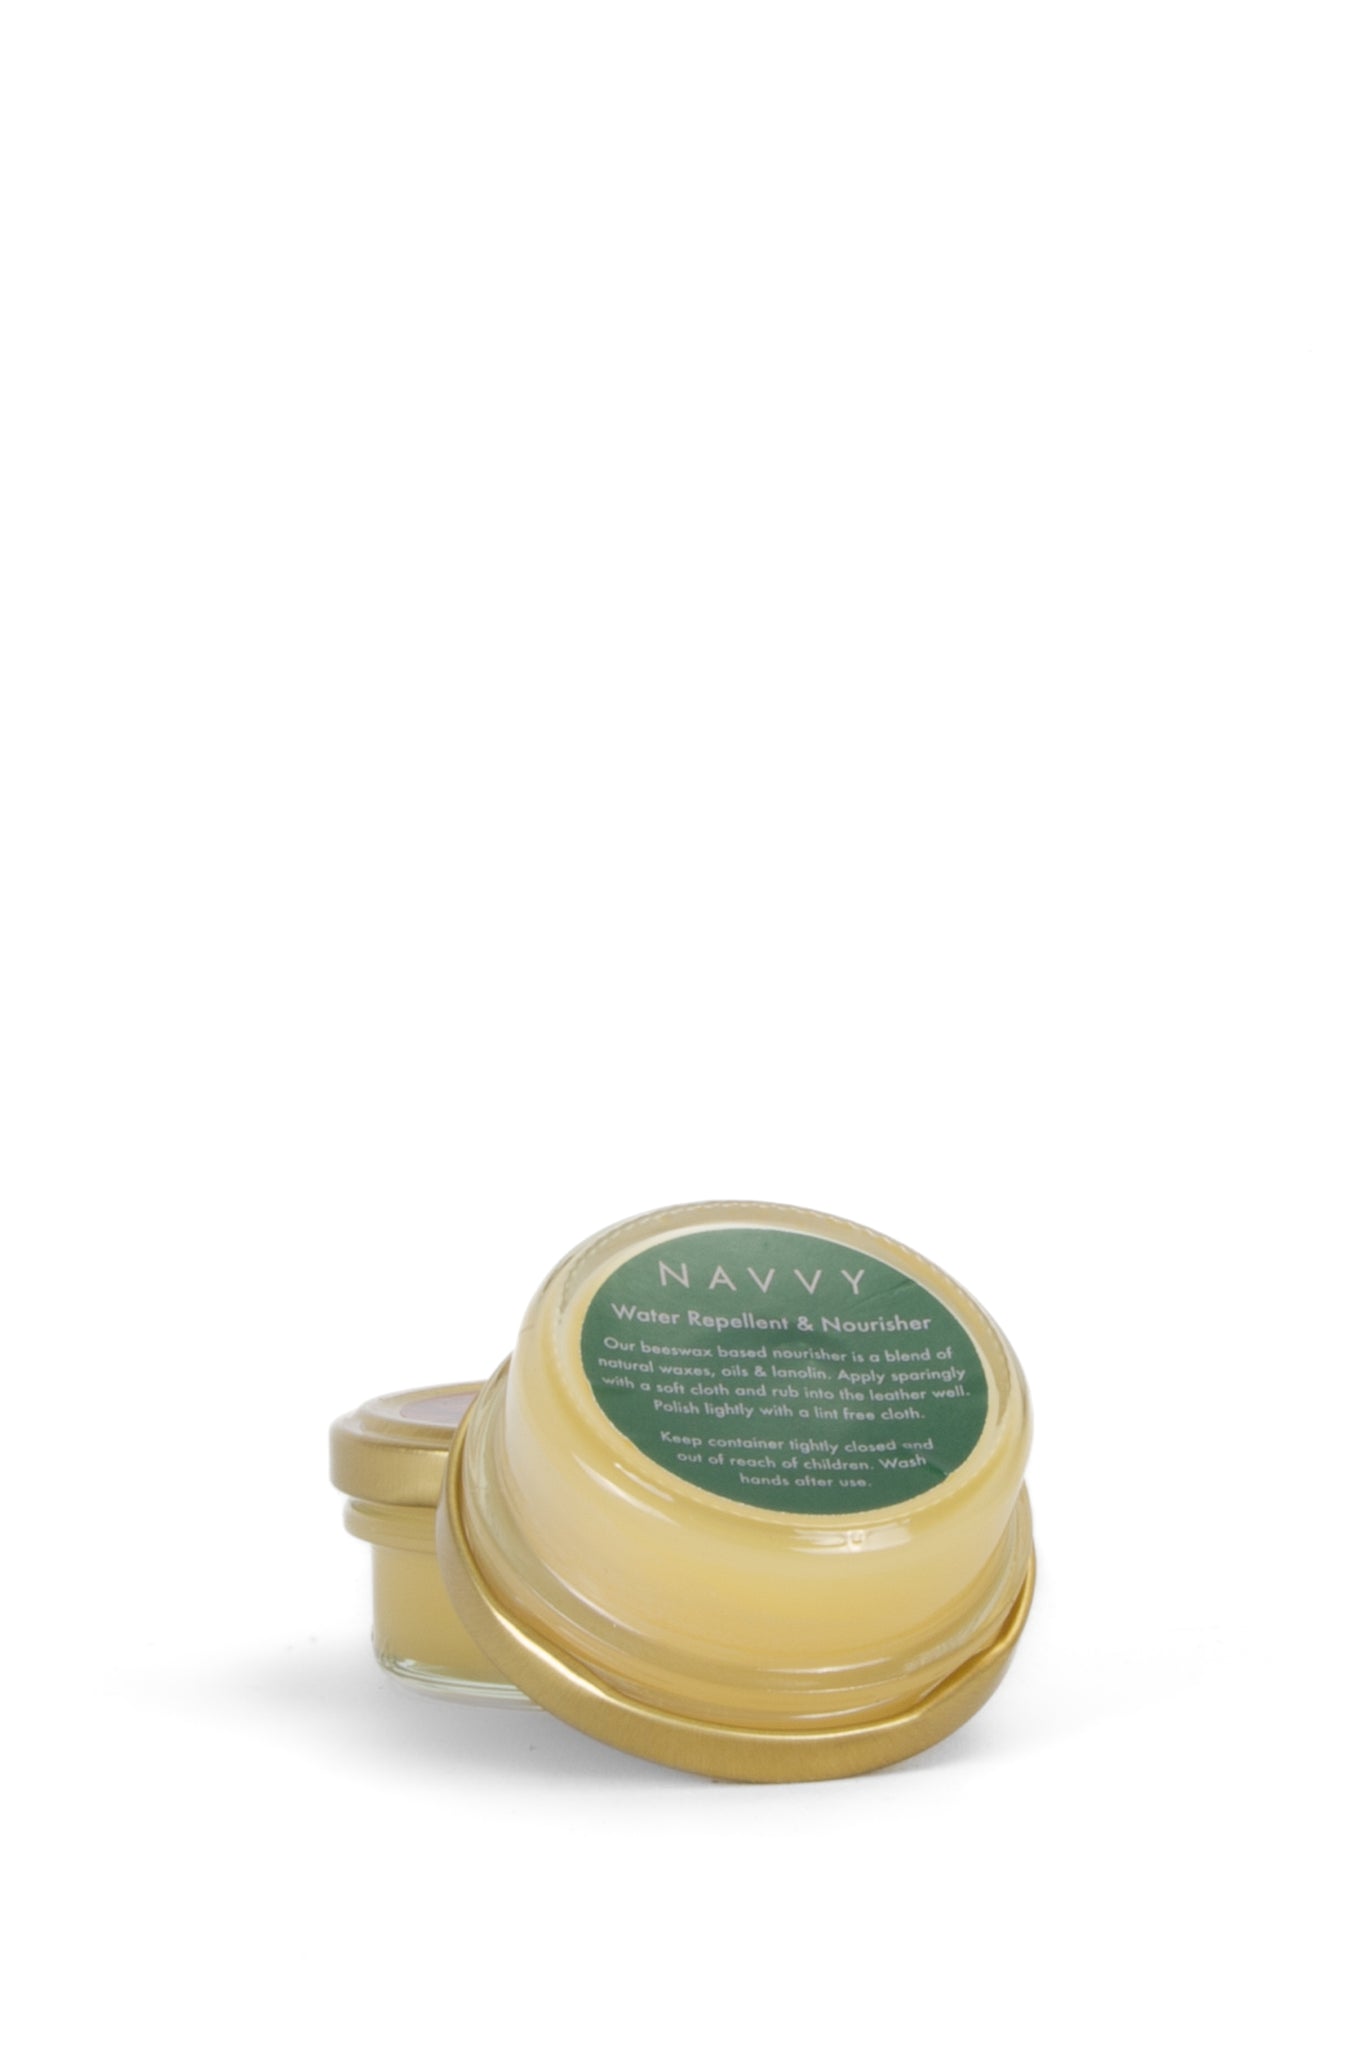 Water Repellent Leather Balm